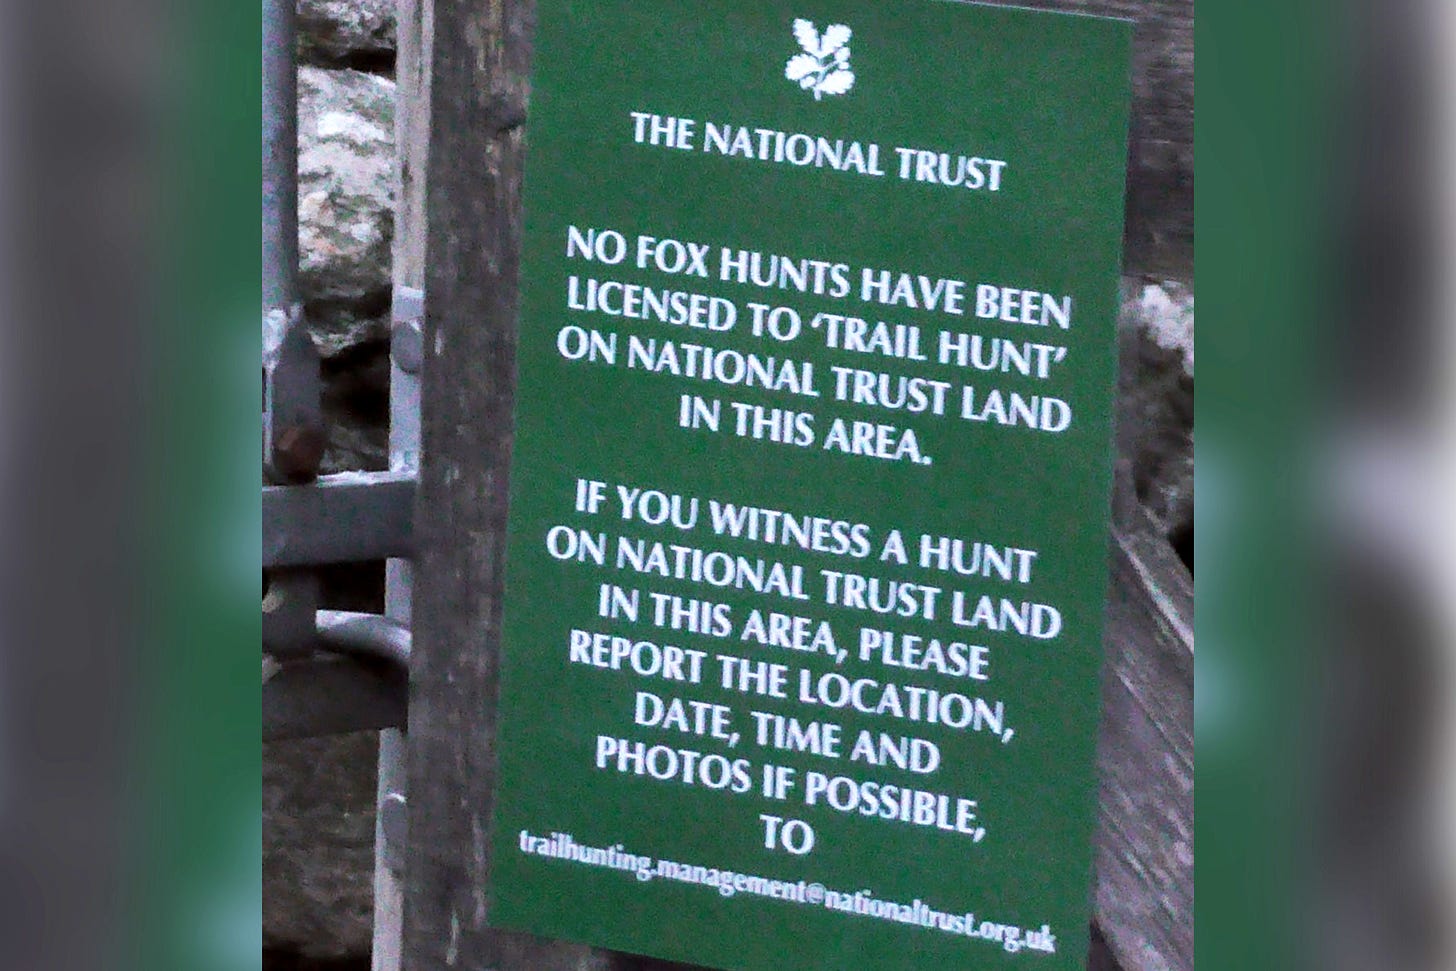 Imitation National trust sign saying "No fox hunts have been licensed to 'trail hunt' on National Trust Land in this area".